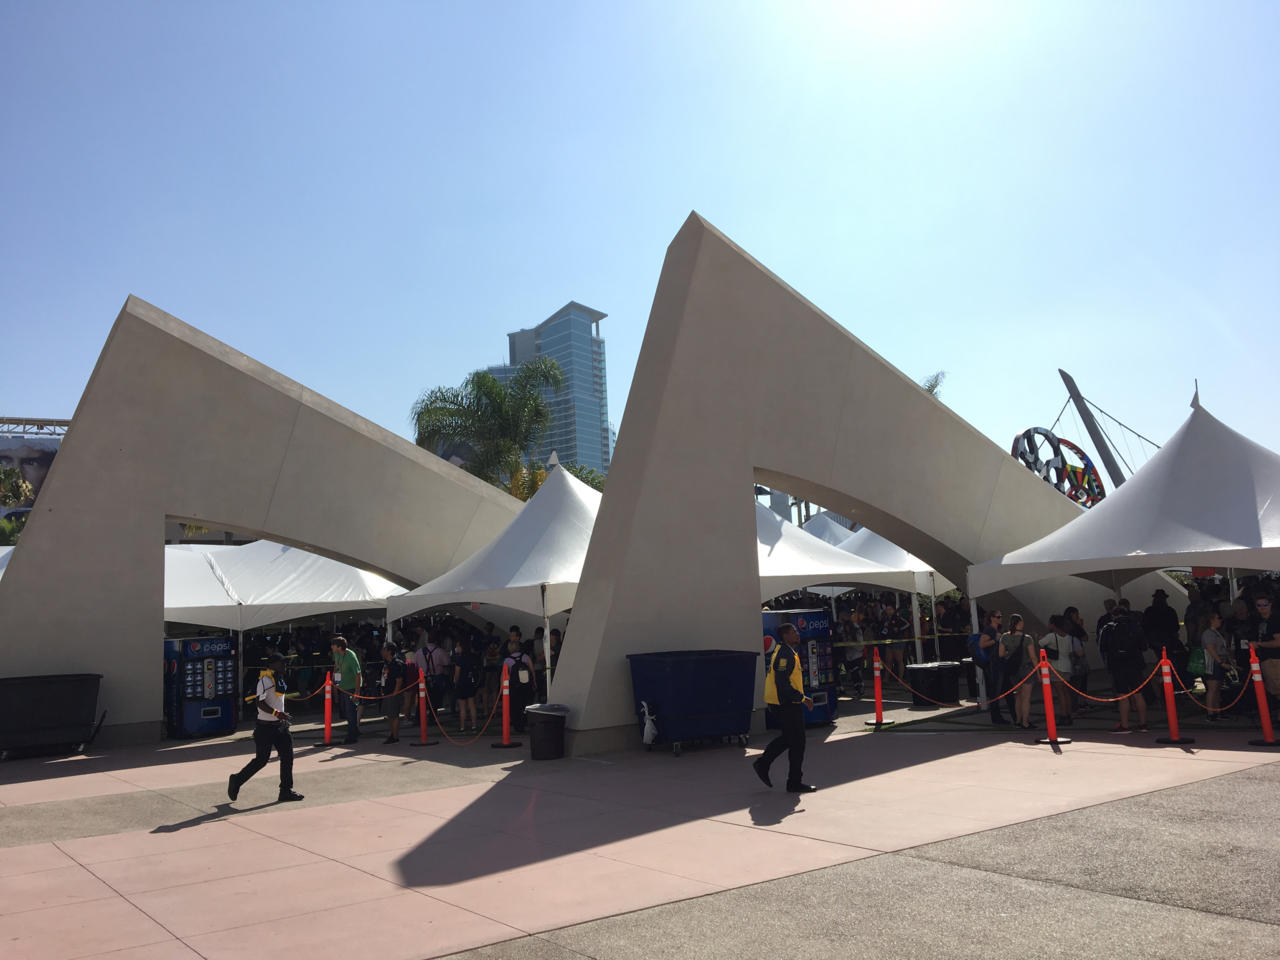 Some of the many tents outside of Hall H